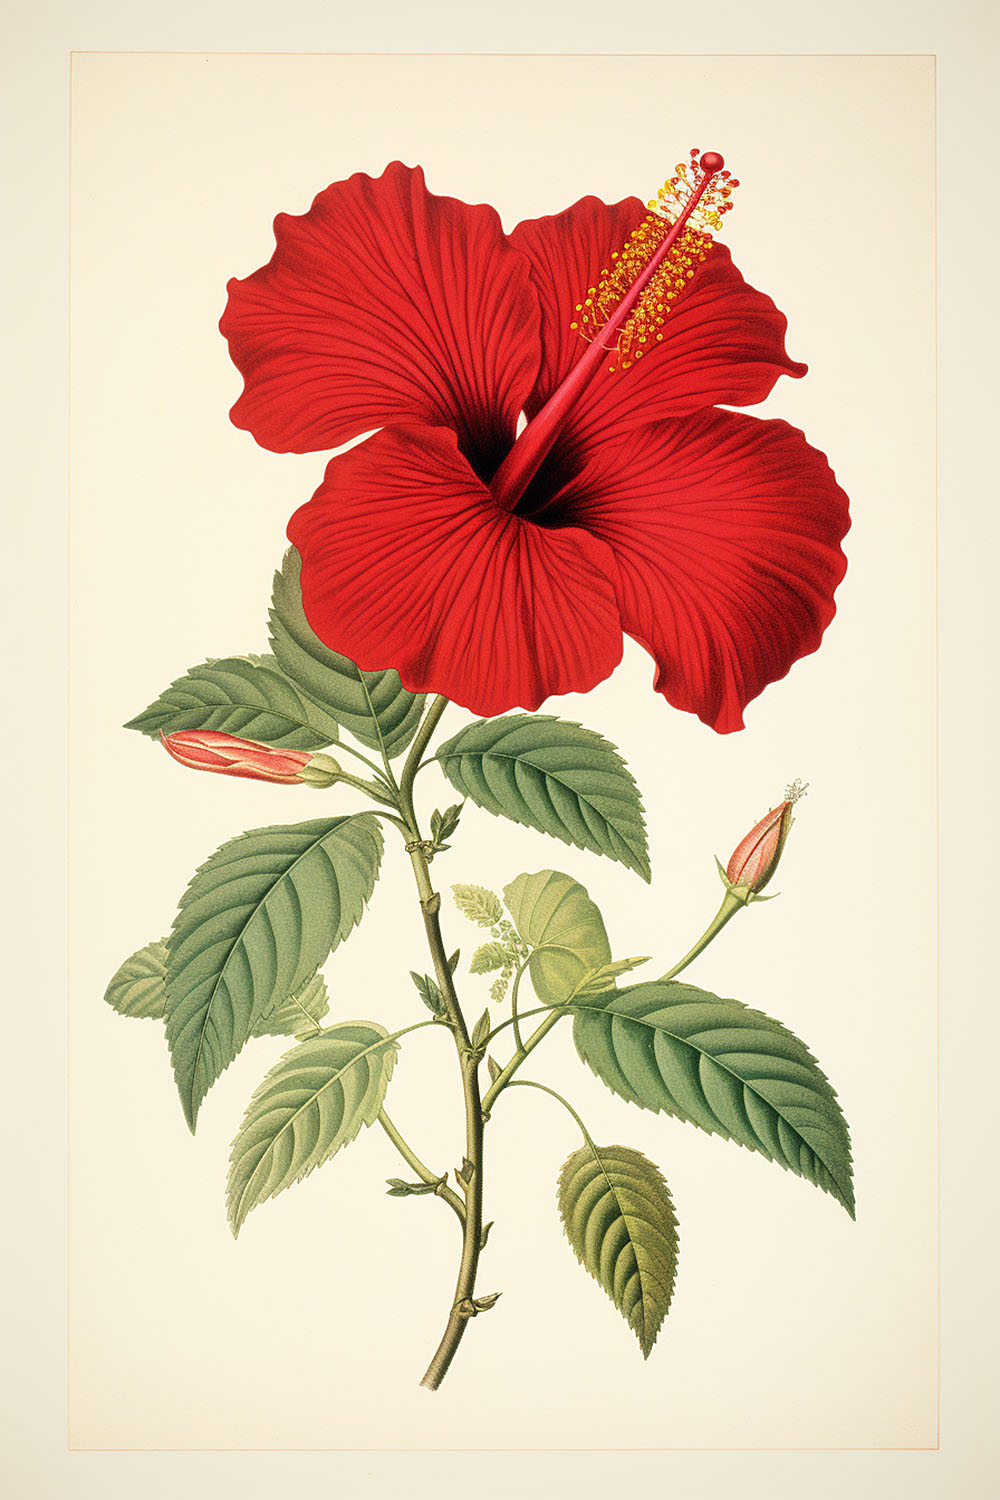 Hand Drawn Hibiscus - hibiscus flower - CleanPNG / KissPNG